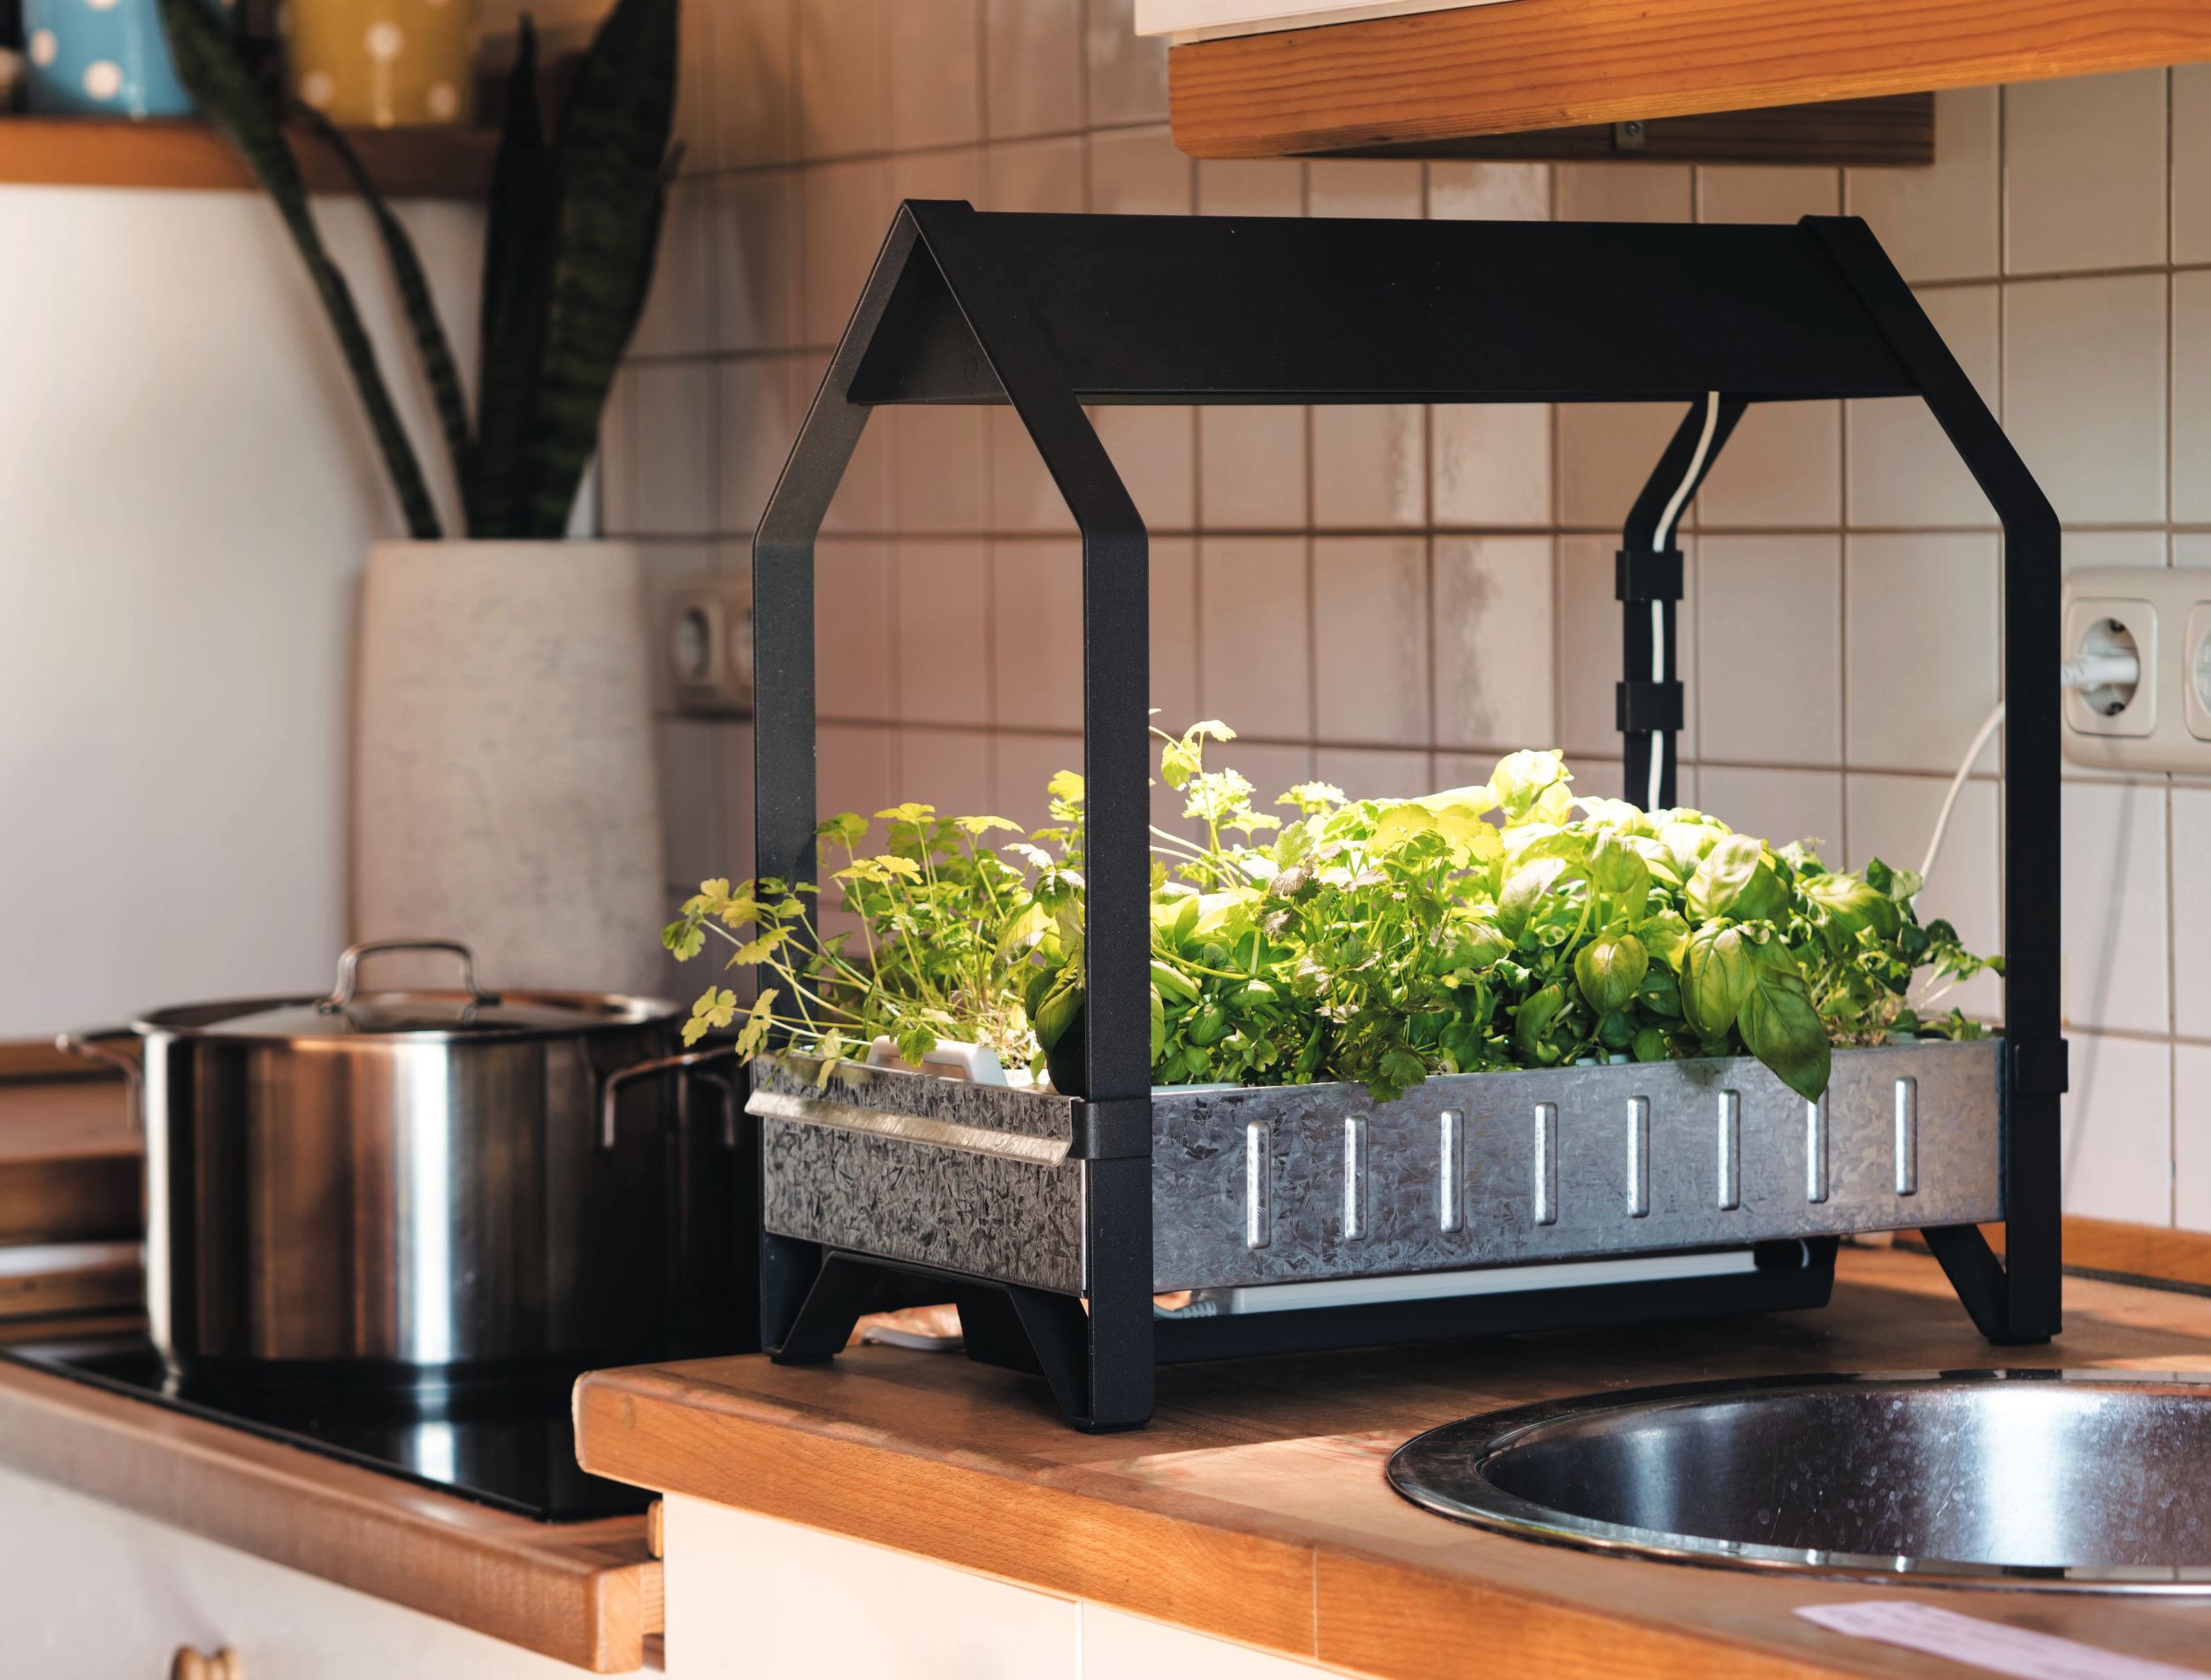 hydroponic grown herbs and vegetables in own kitchen with hydroponic grow kit